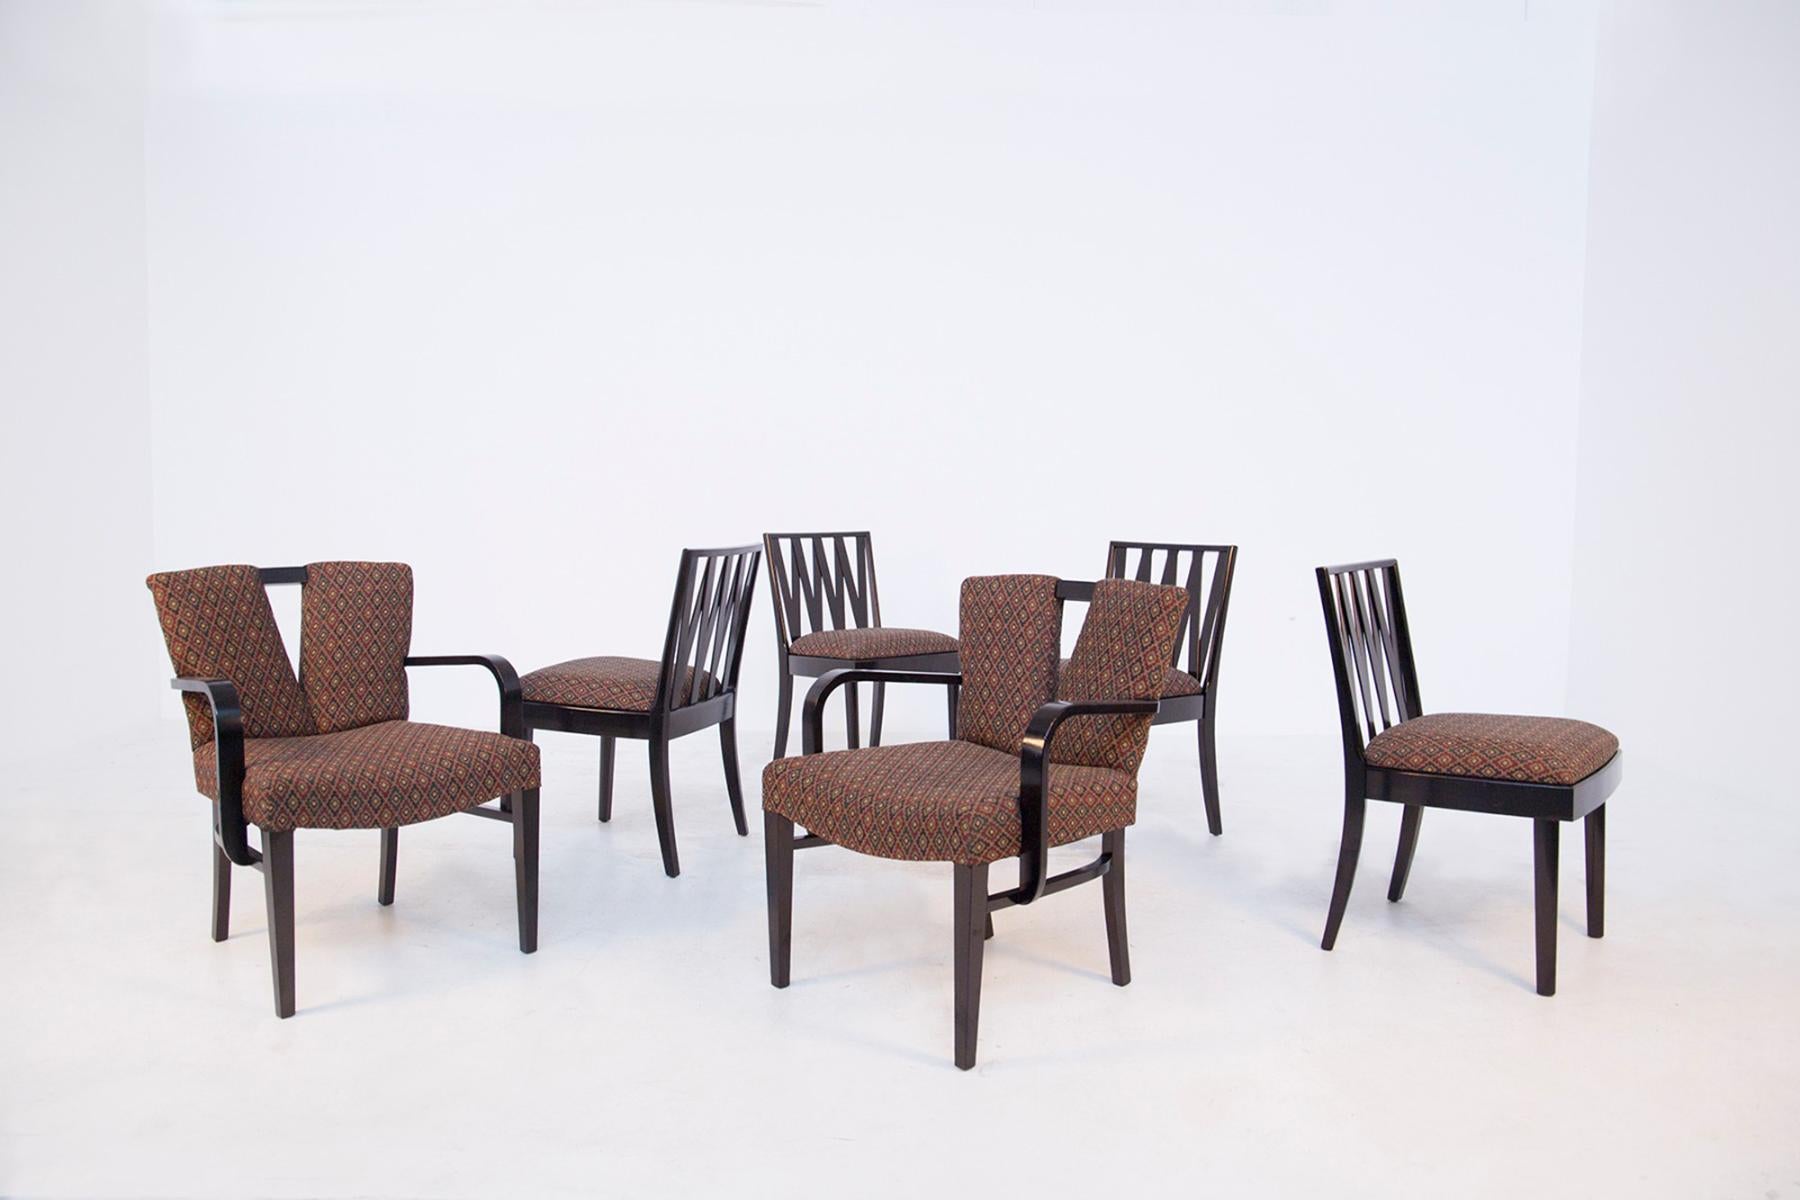 Wonderful set of six dining chairs in finely ebonized wood and fabric, designed by Paul Frankl (1886 - 1958) for Johnson Furniture and distributed by John Stuart in 1950.
Paul Frankl initially known for his 